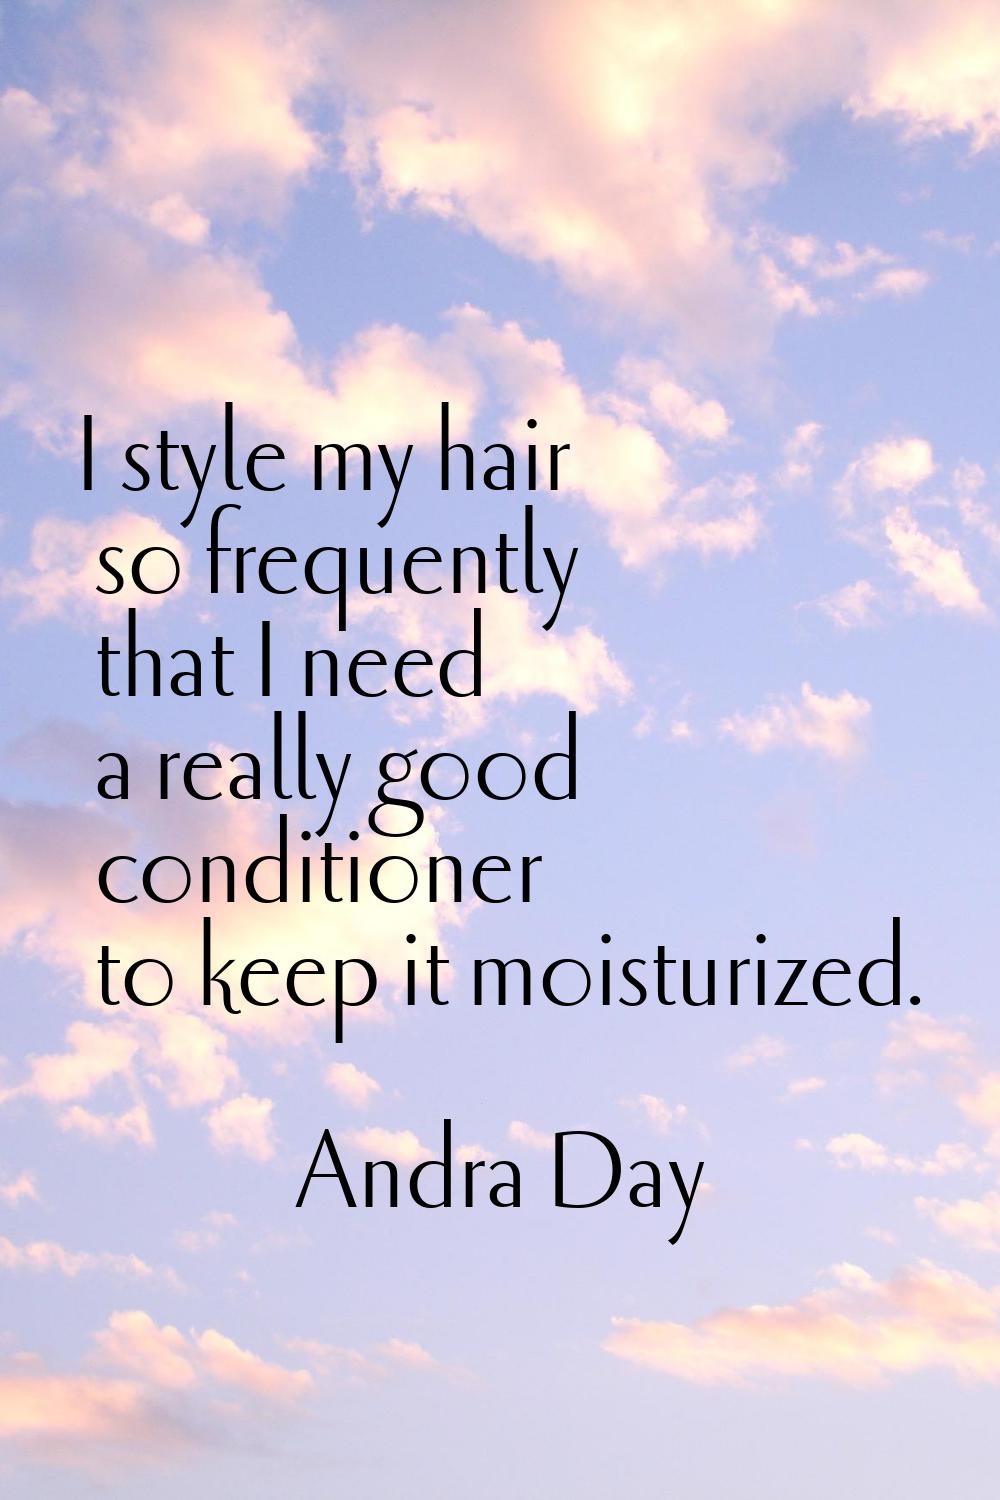 I style my hair so frequently that I need a really good conditioner to keep it moisturized.